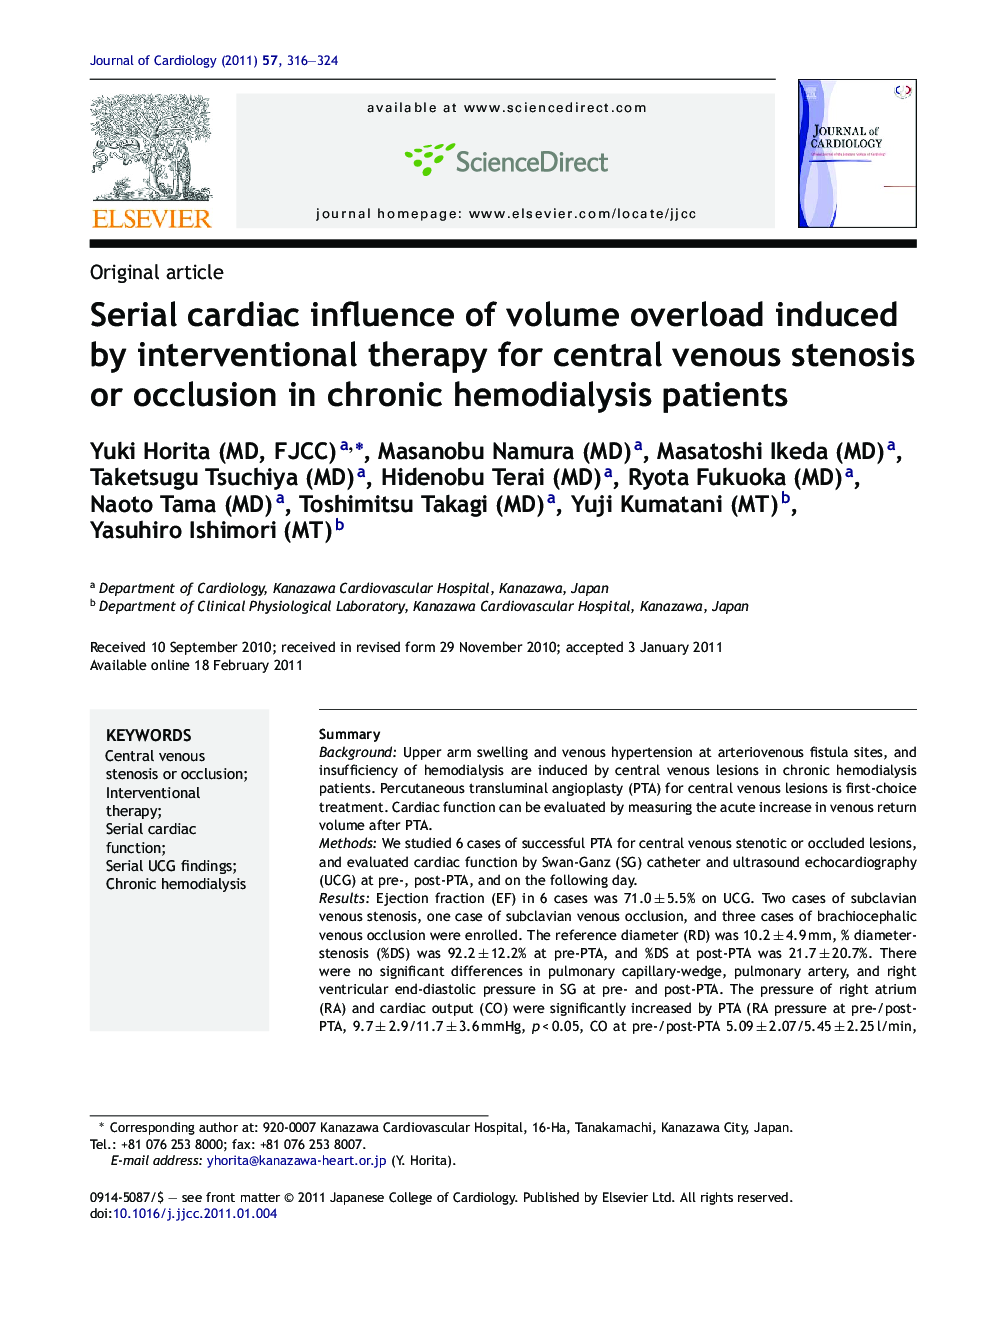 Serial cardiac influence of volume overload induced by interventional therapy for central venous stenosis or occlusion in chronic hemodialysis patients